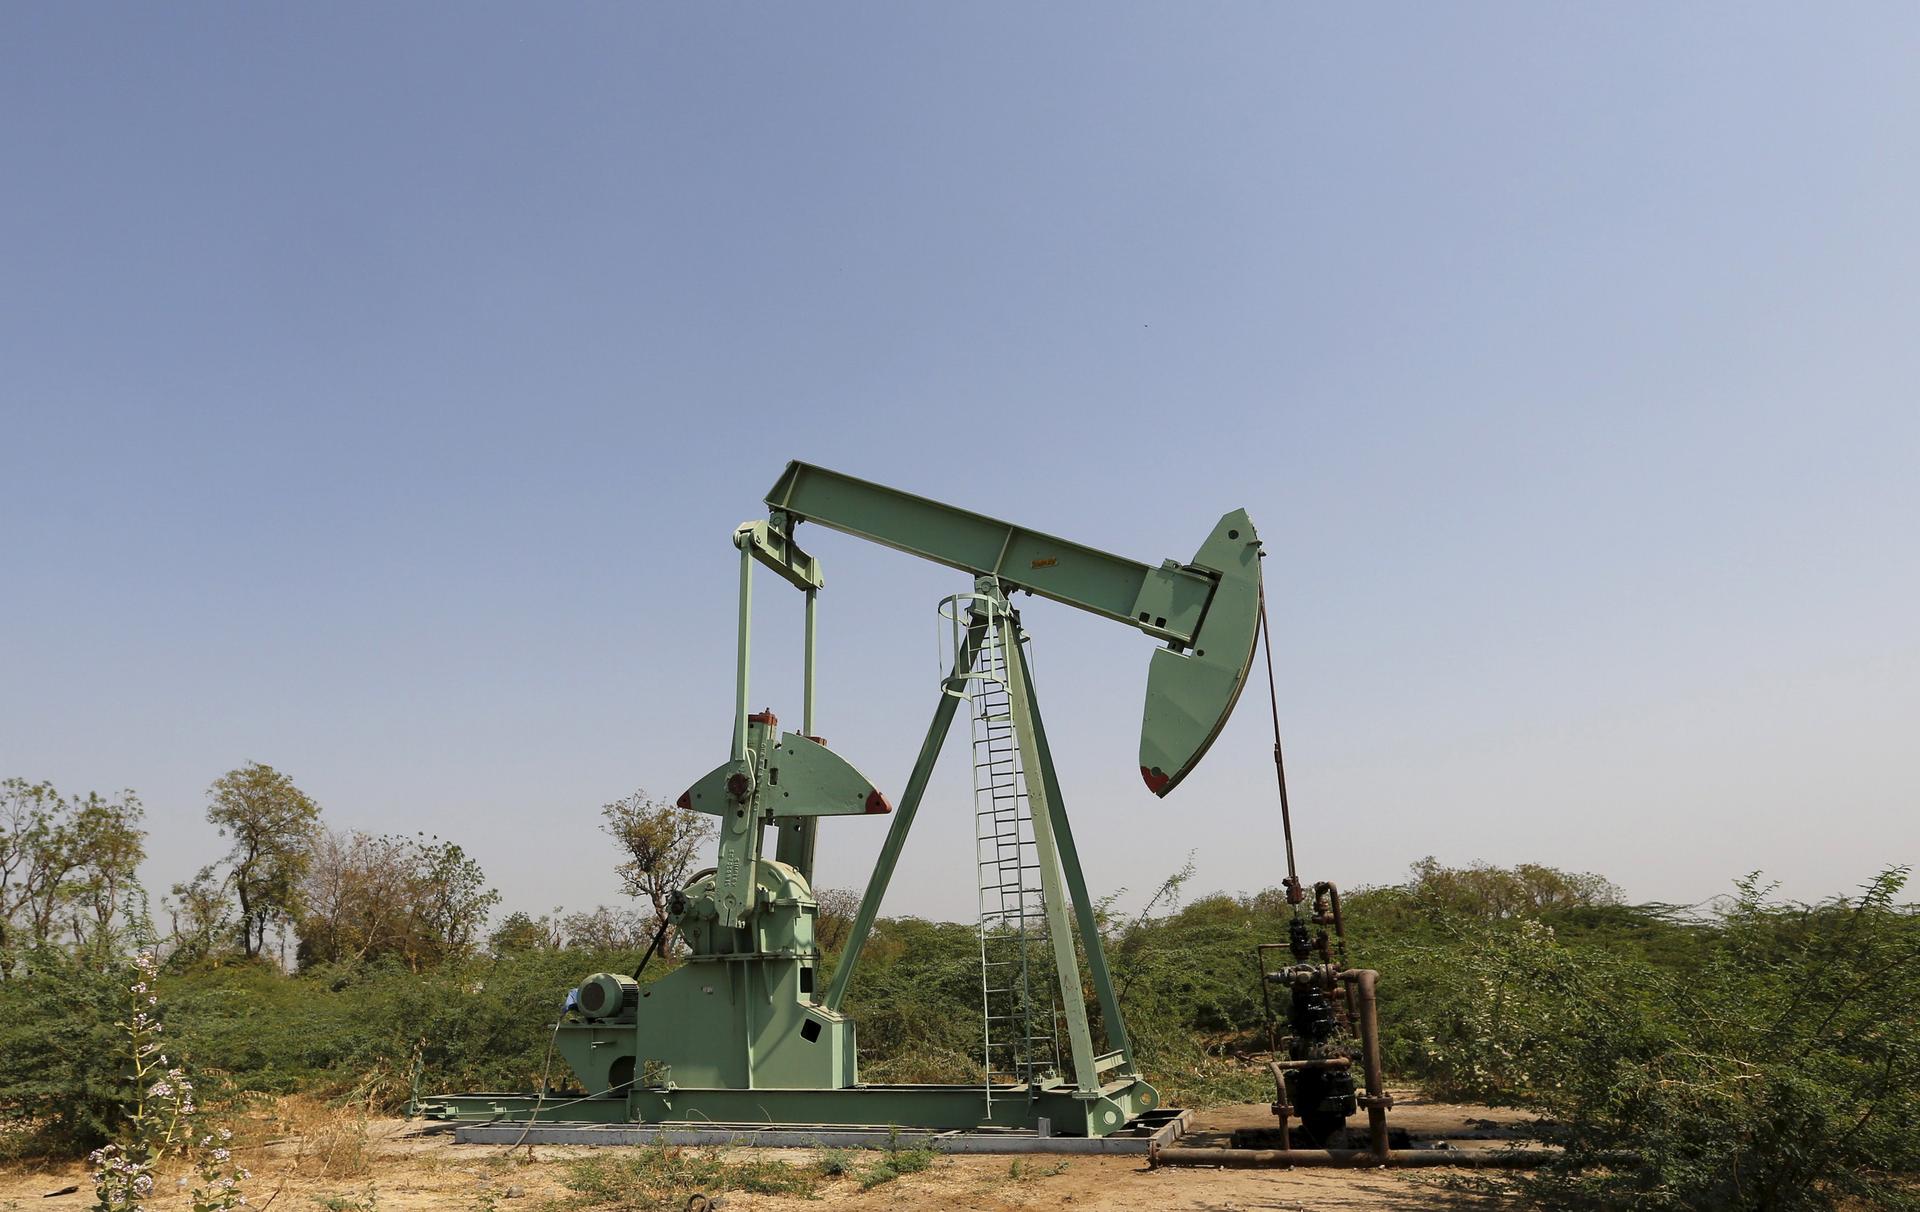 An oil well in India